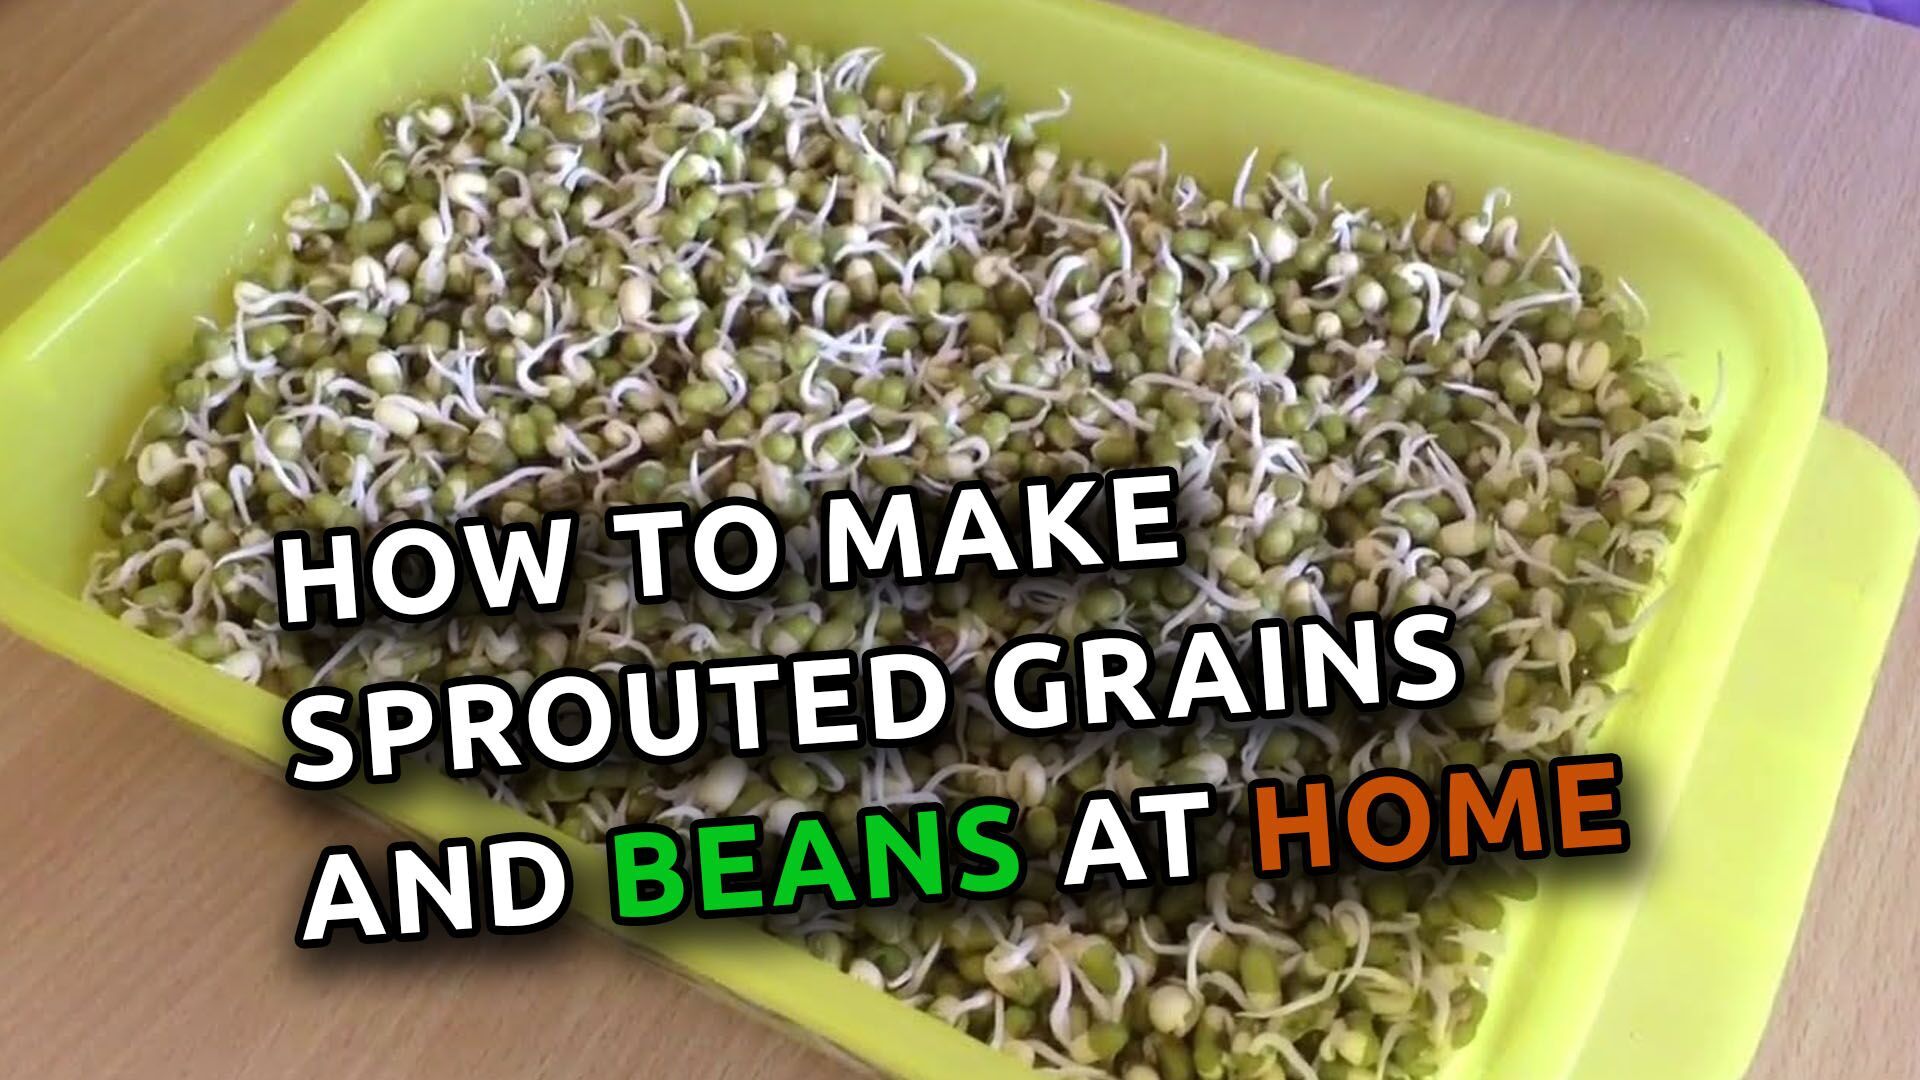 How to Make Sprouted Grains and Beans at Home